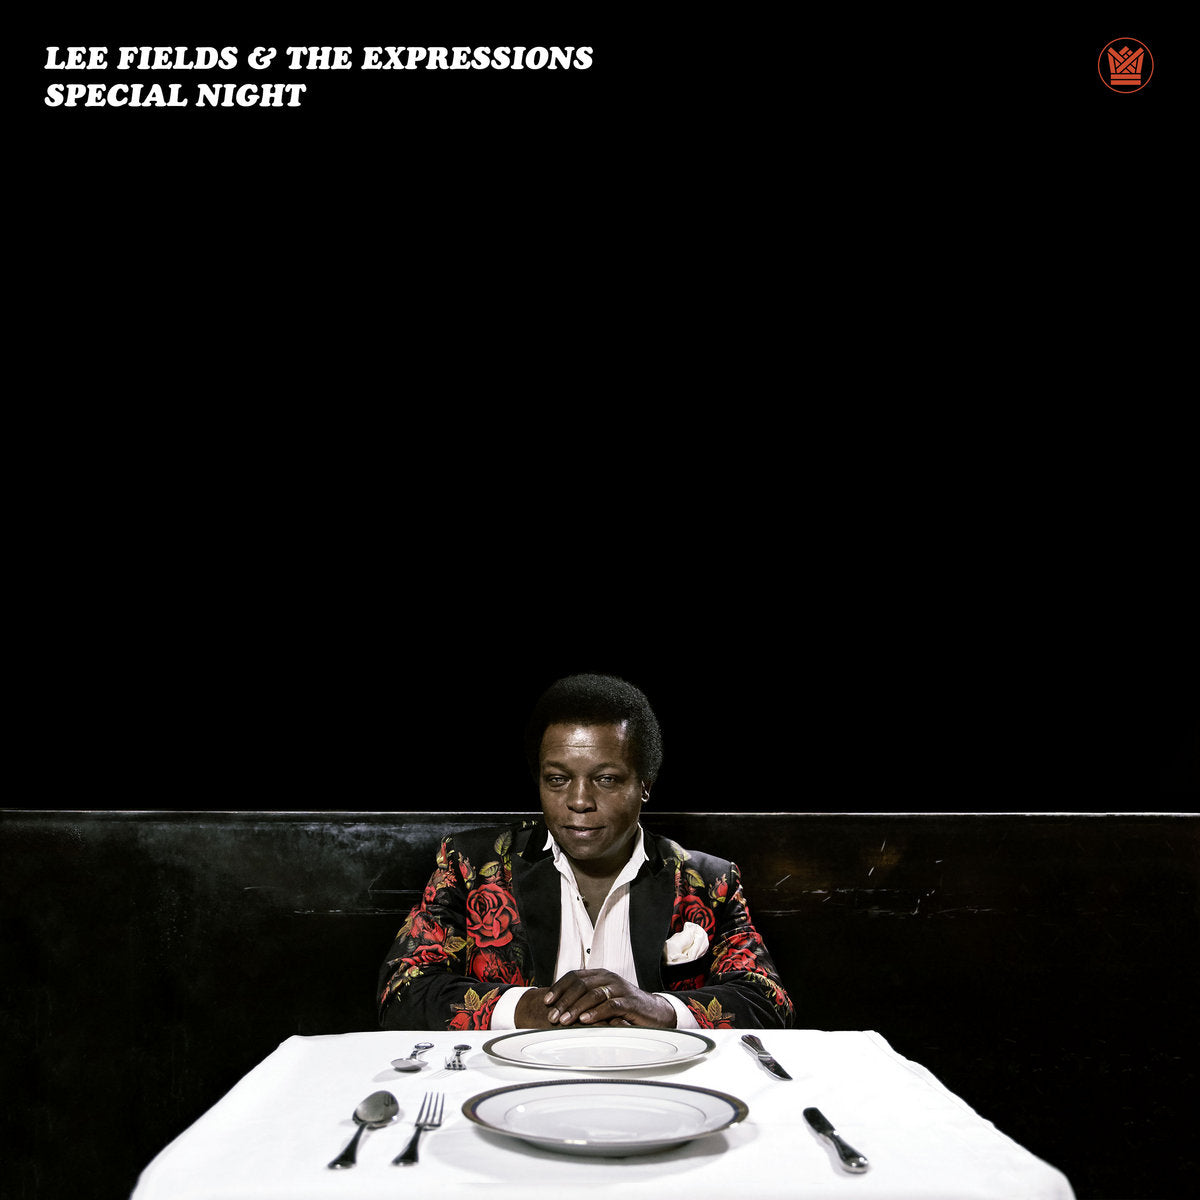 LEE FIELDS & THE EXPRESSIONS - Special Night - LP - Vinyl